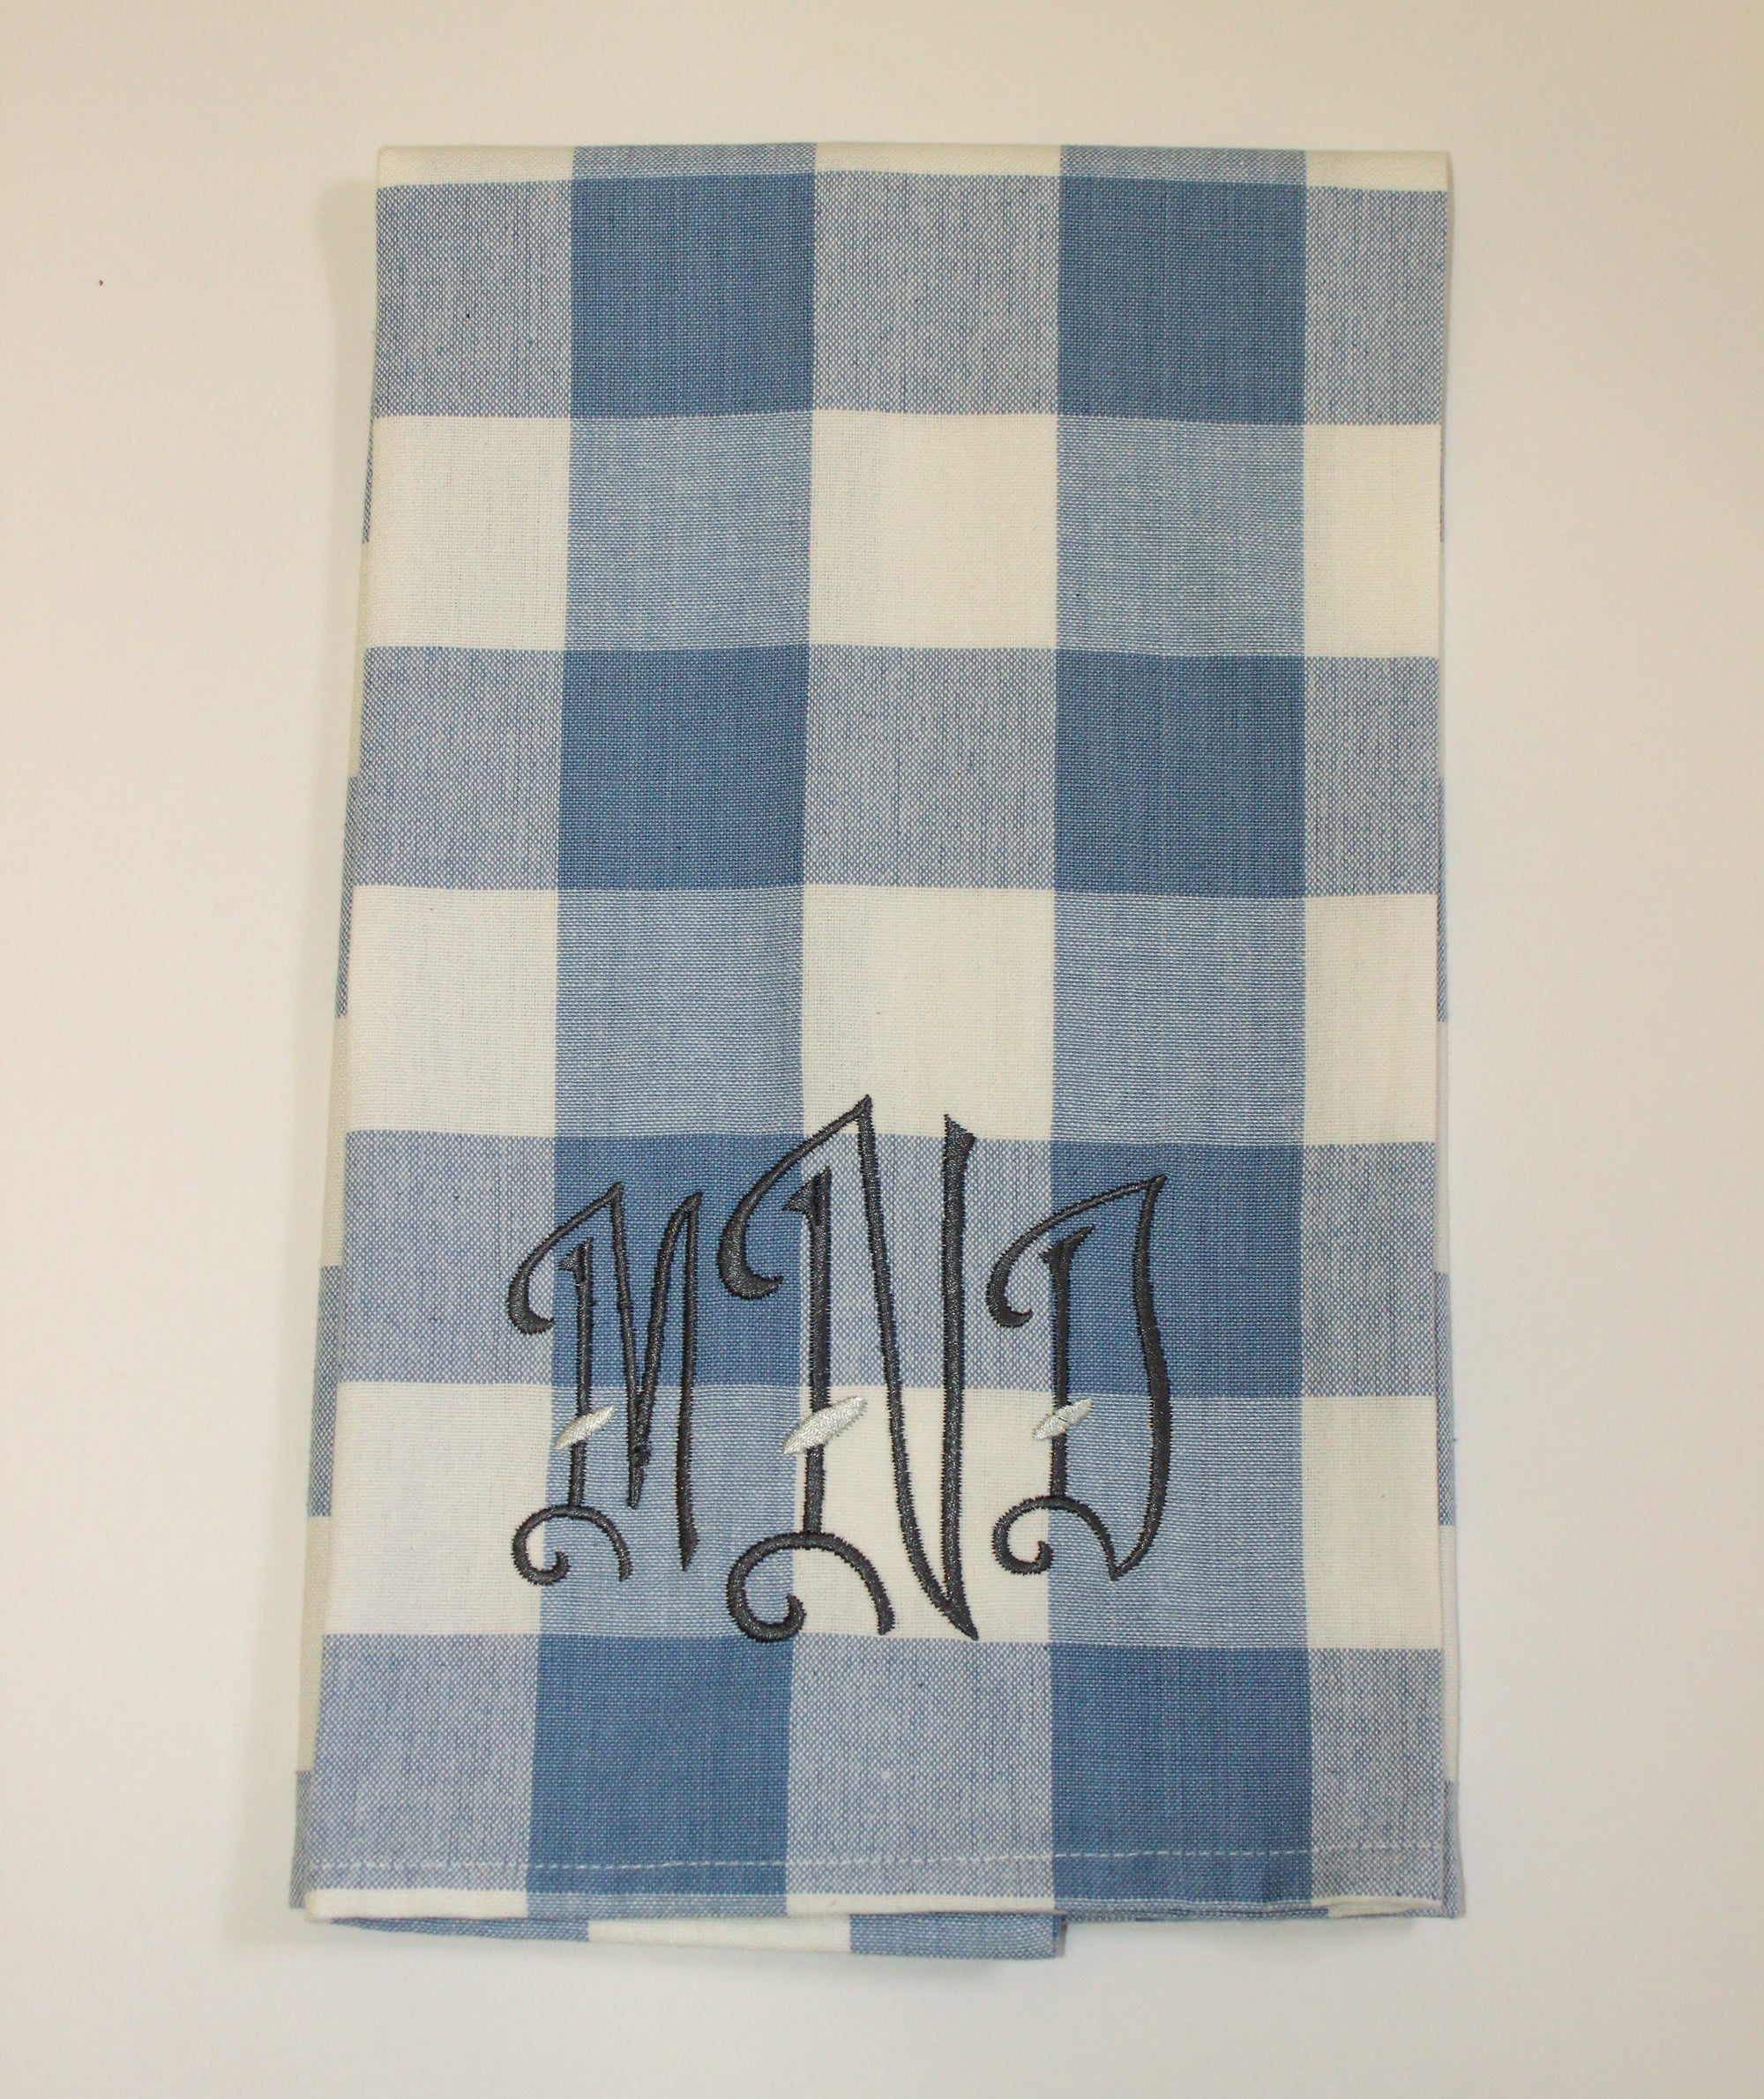 Buffalo Check Guest or Kitchen Towel